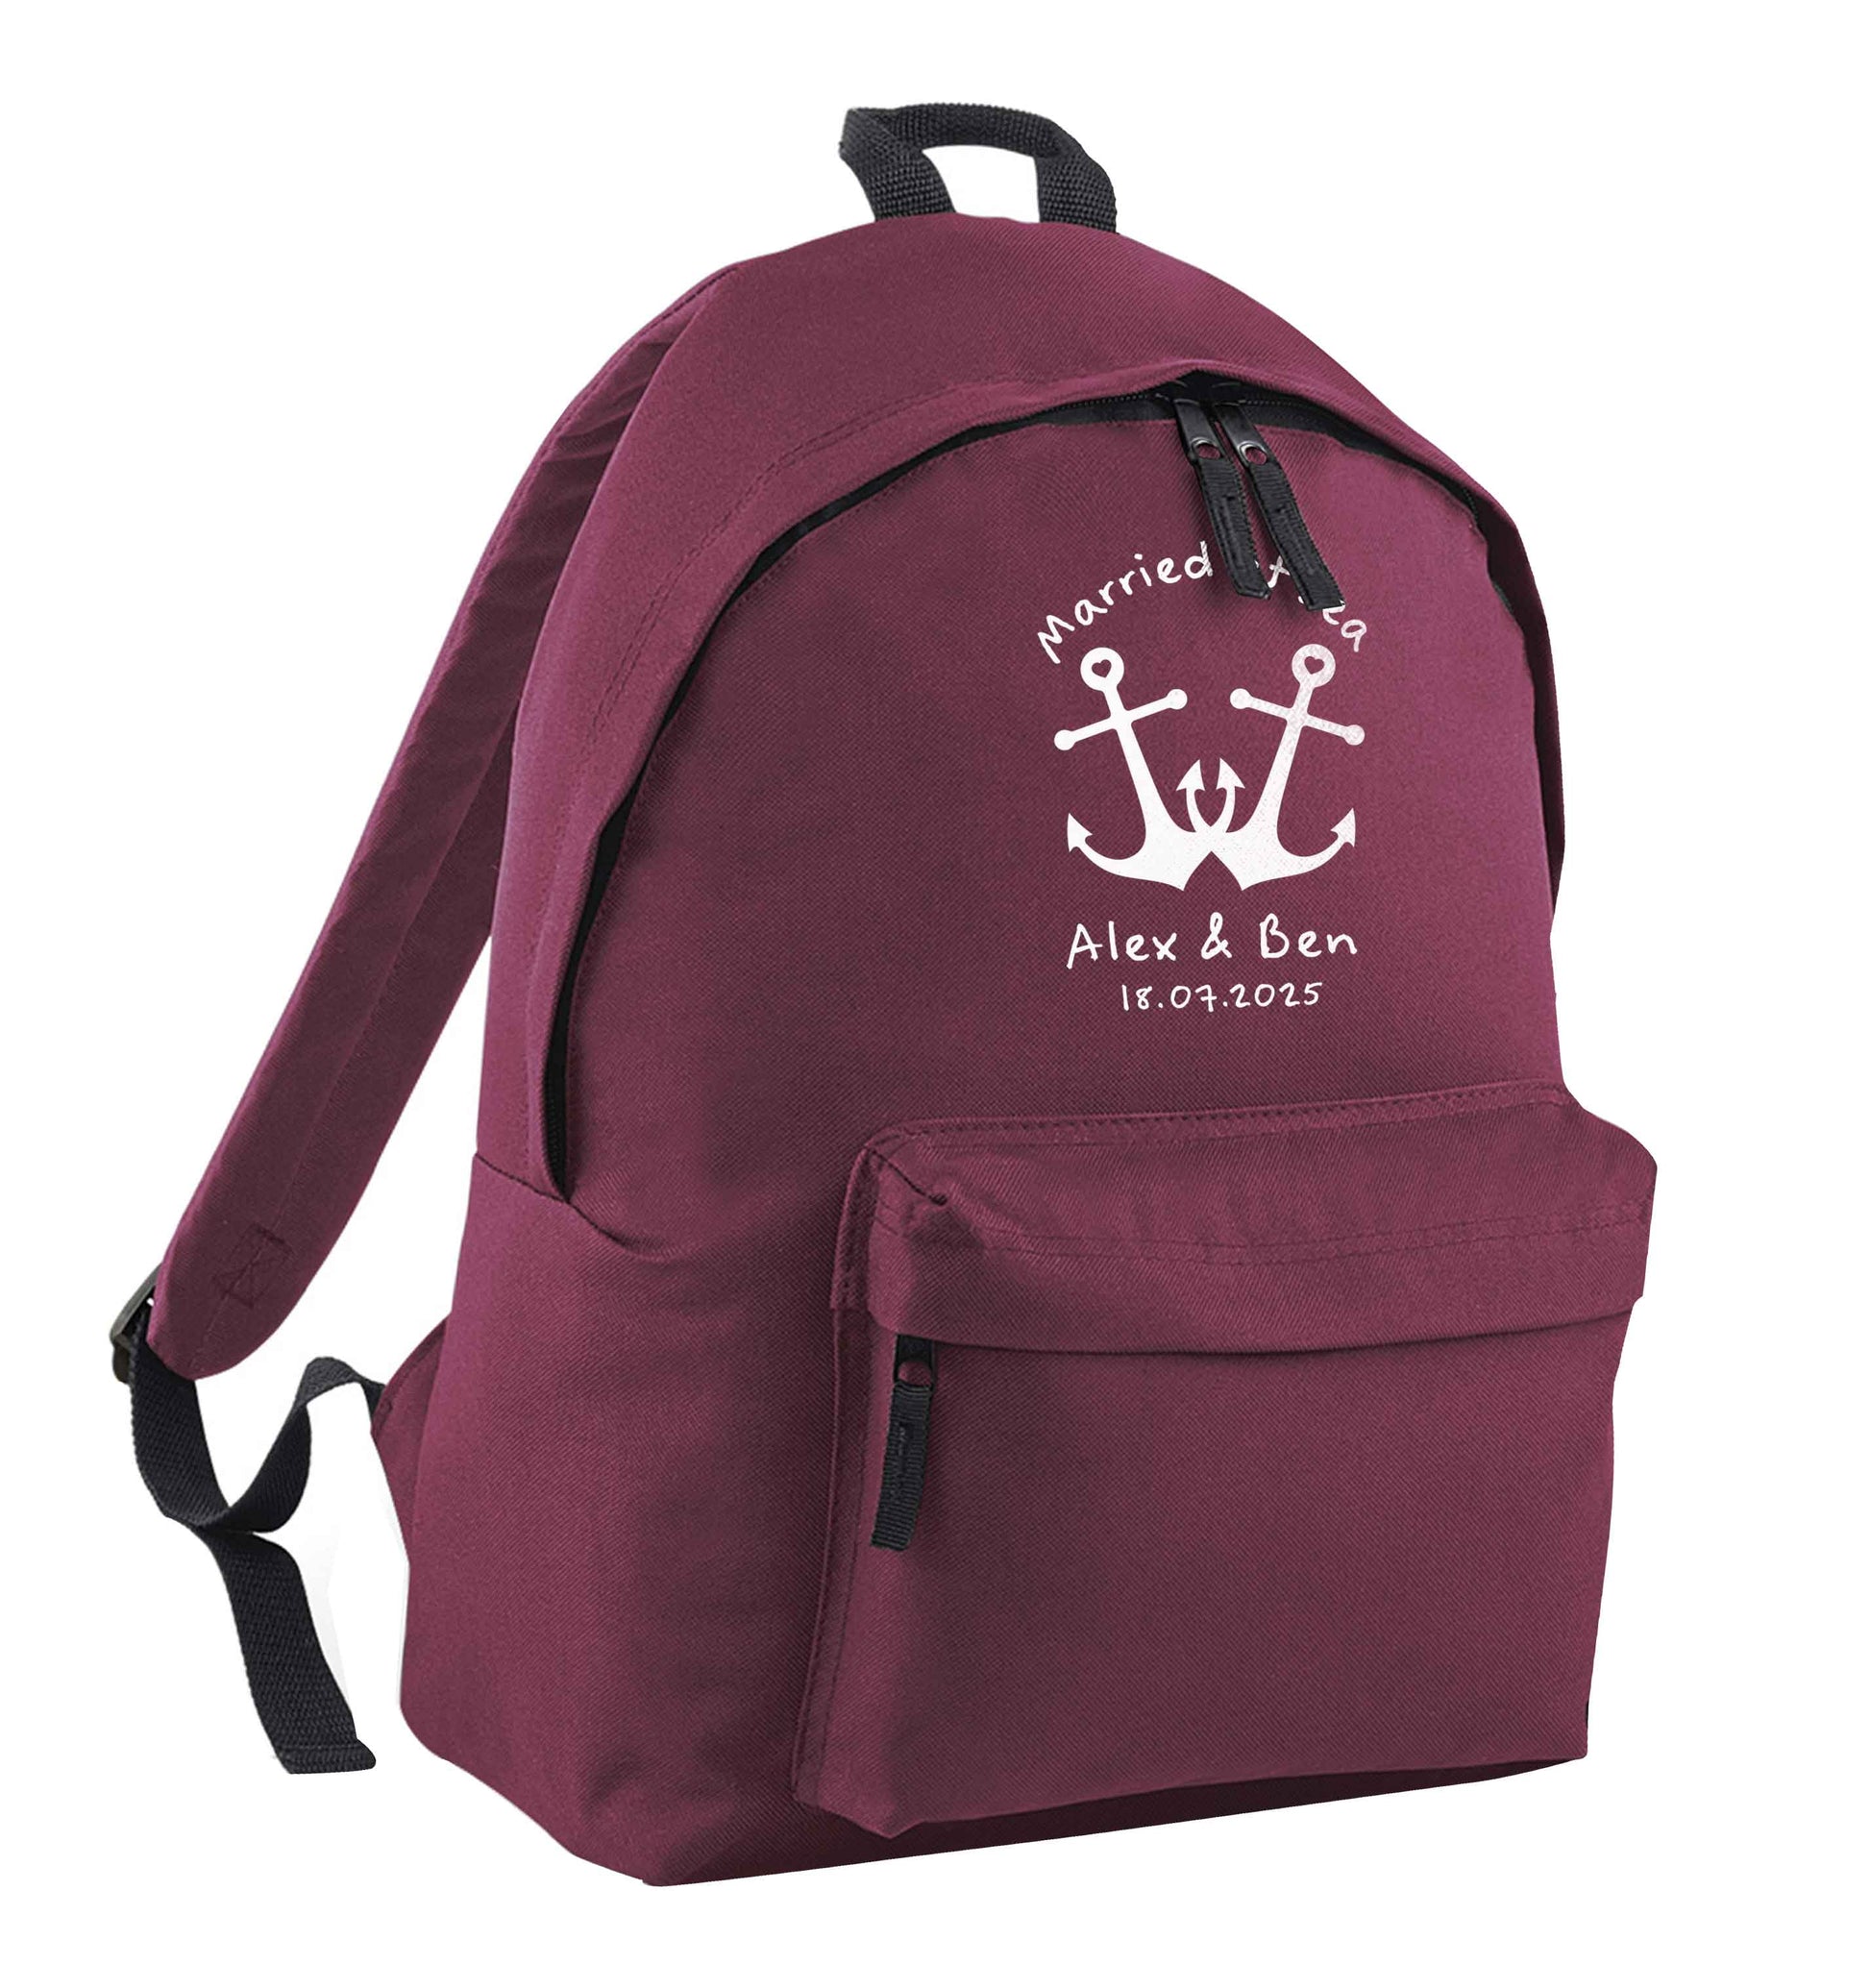 Married at sea blue anchors maroon adults backpack